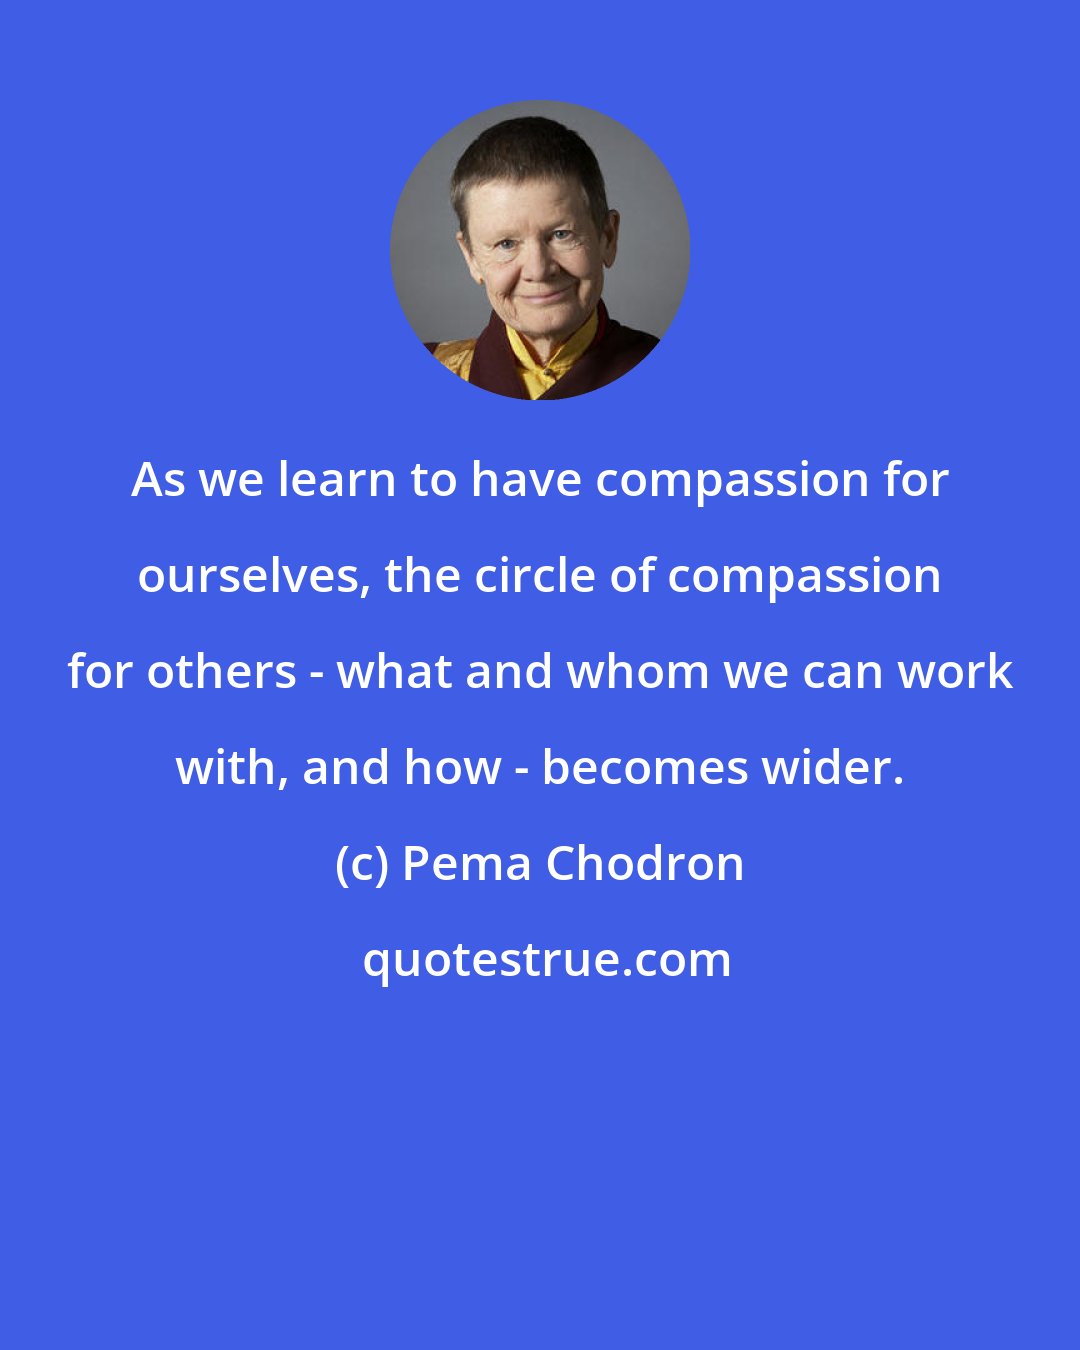 Pema Chodron: As we learn to have compassion for ourselves, the circle of compassion for others - what and whom we can work with, and how - becomes wider.